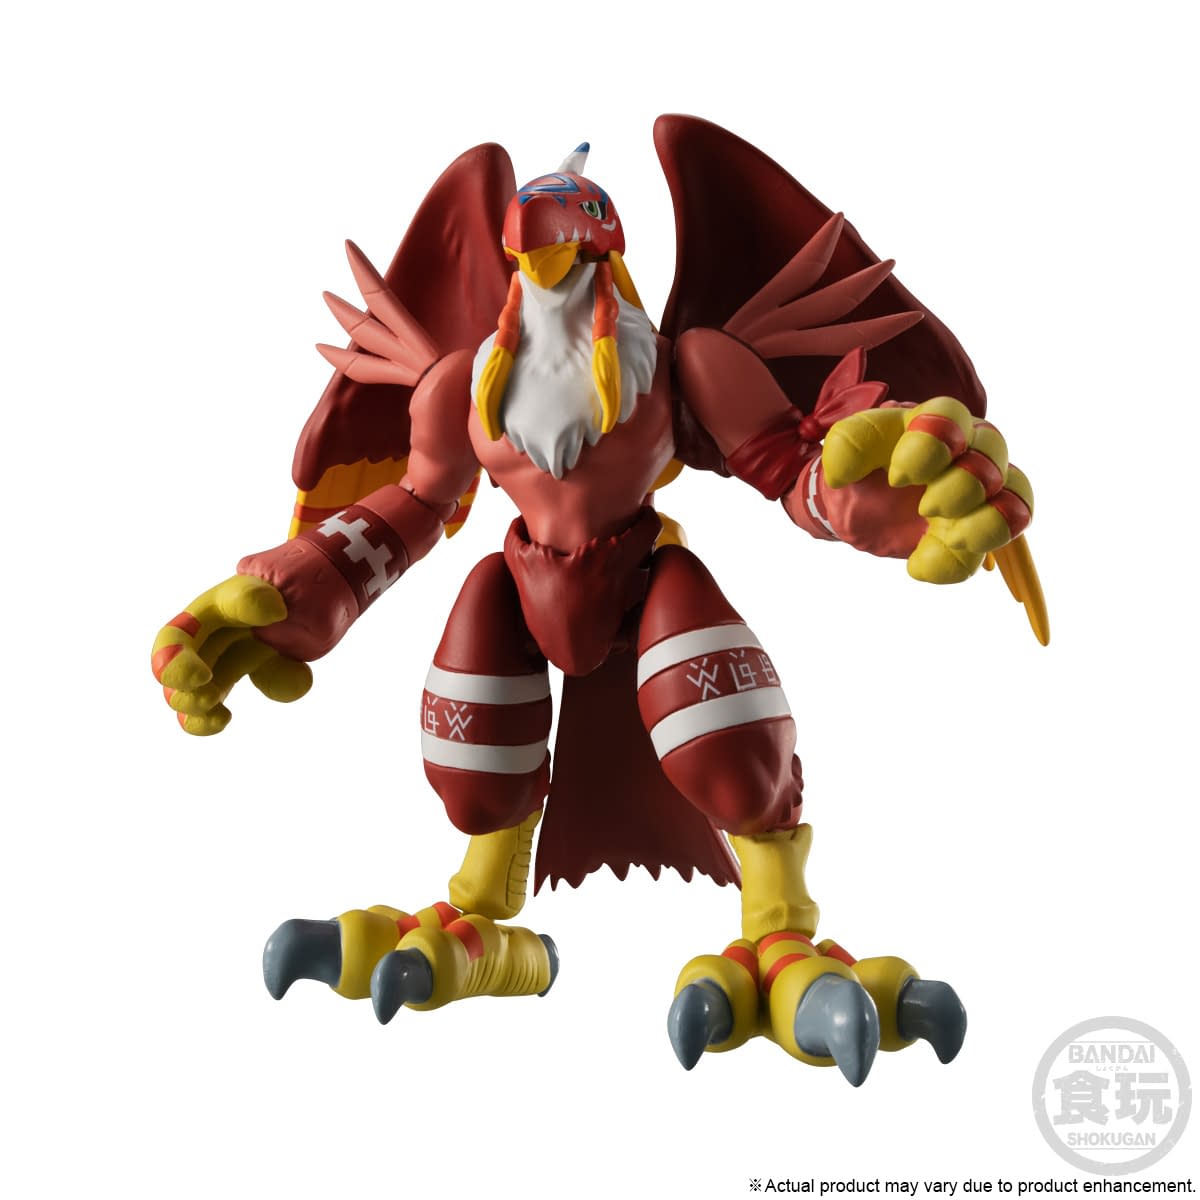 Digimon Digivolutions Get Complete Set of Figures with Bandai